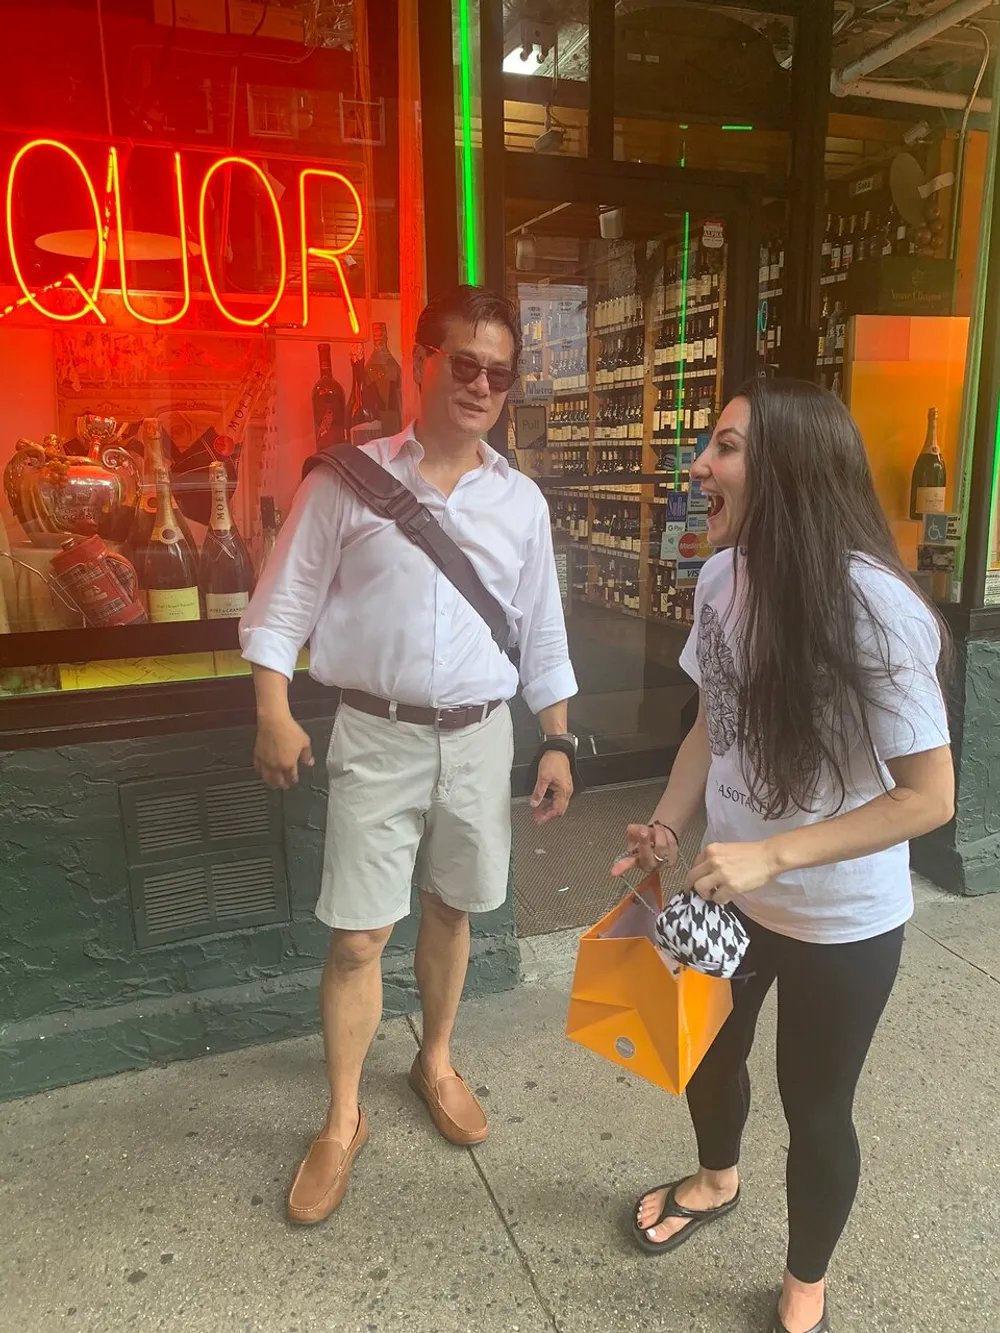 A man and a woman are standing in front of a store with a neon liquor sign sharing a moment of laughter or conversation